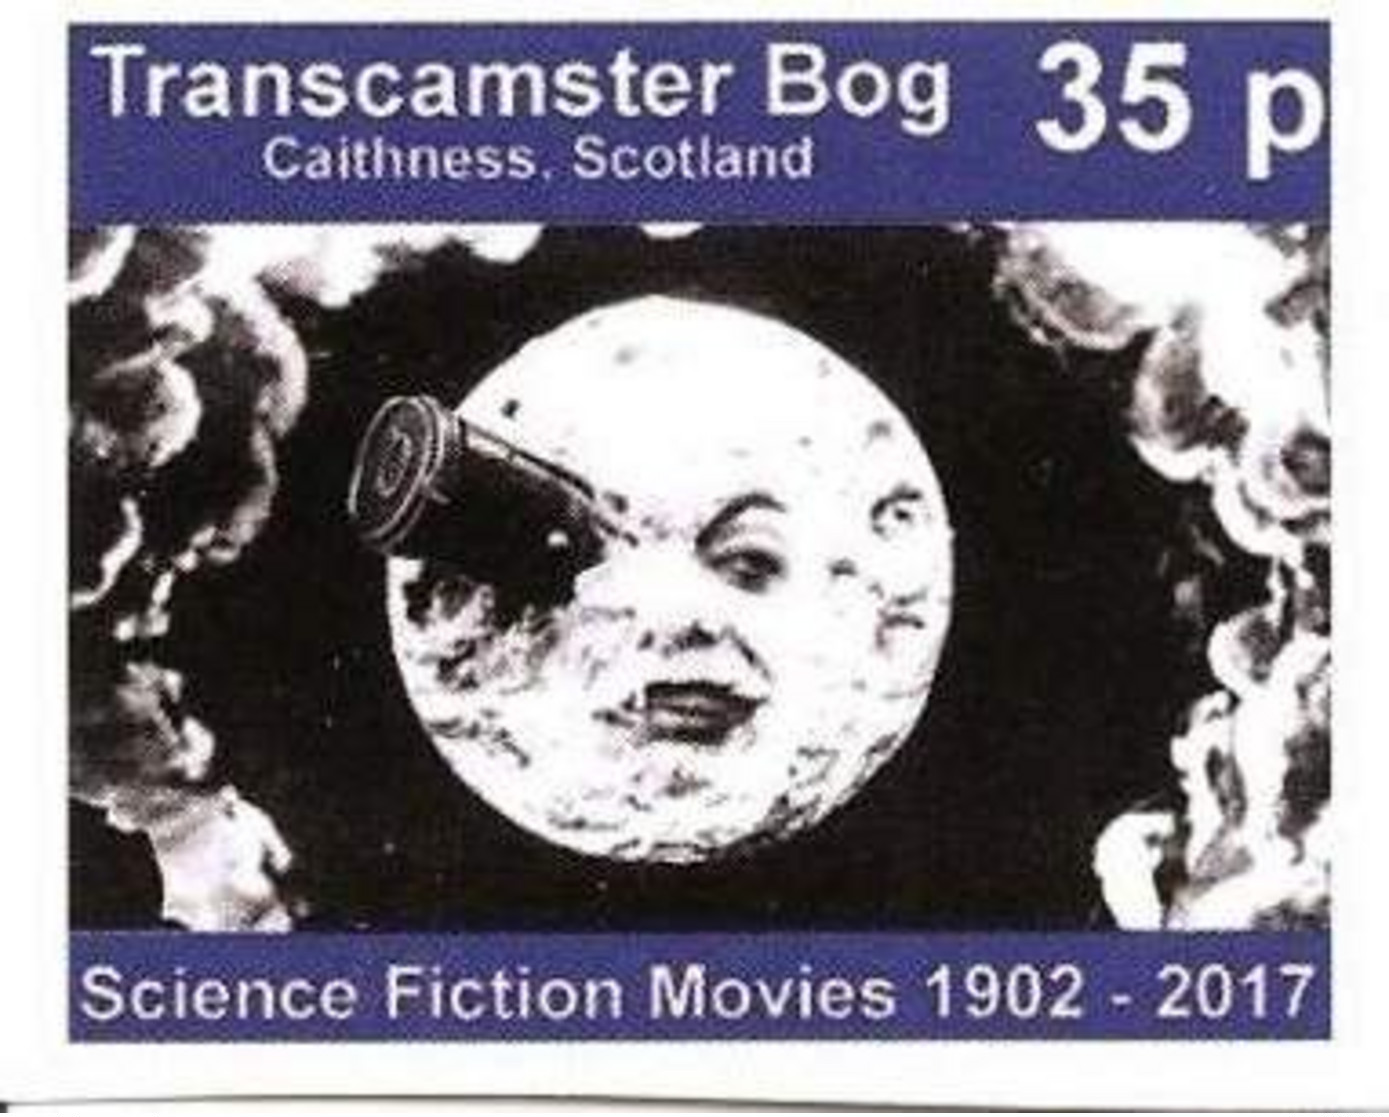 SCOTLAND - TRANSCAMSTER BOG - 2017 - Science Fiction Movies - Imperf Single Stamp - Mint Never Hinged No Gum - Local - Cinderellas